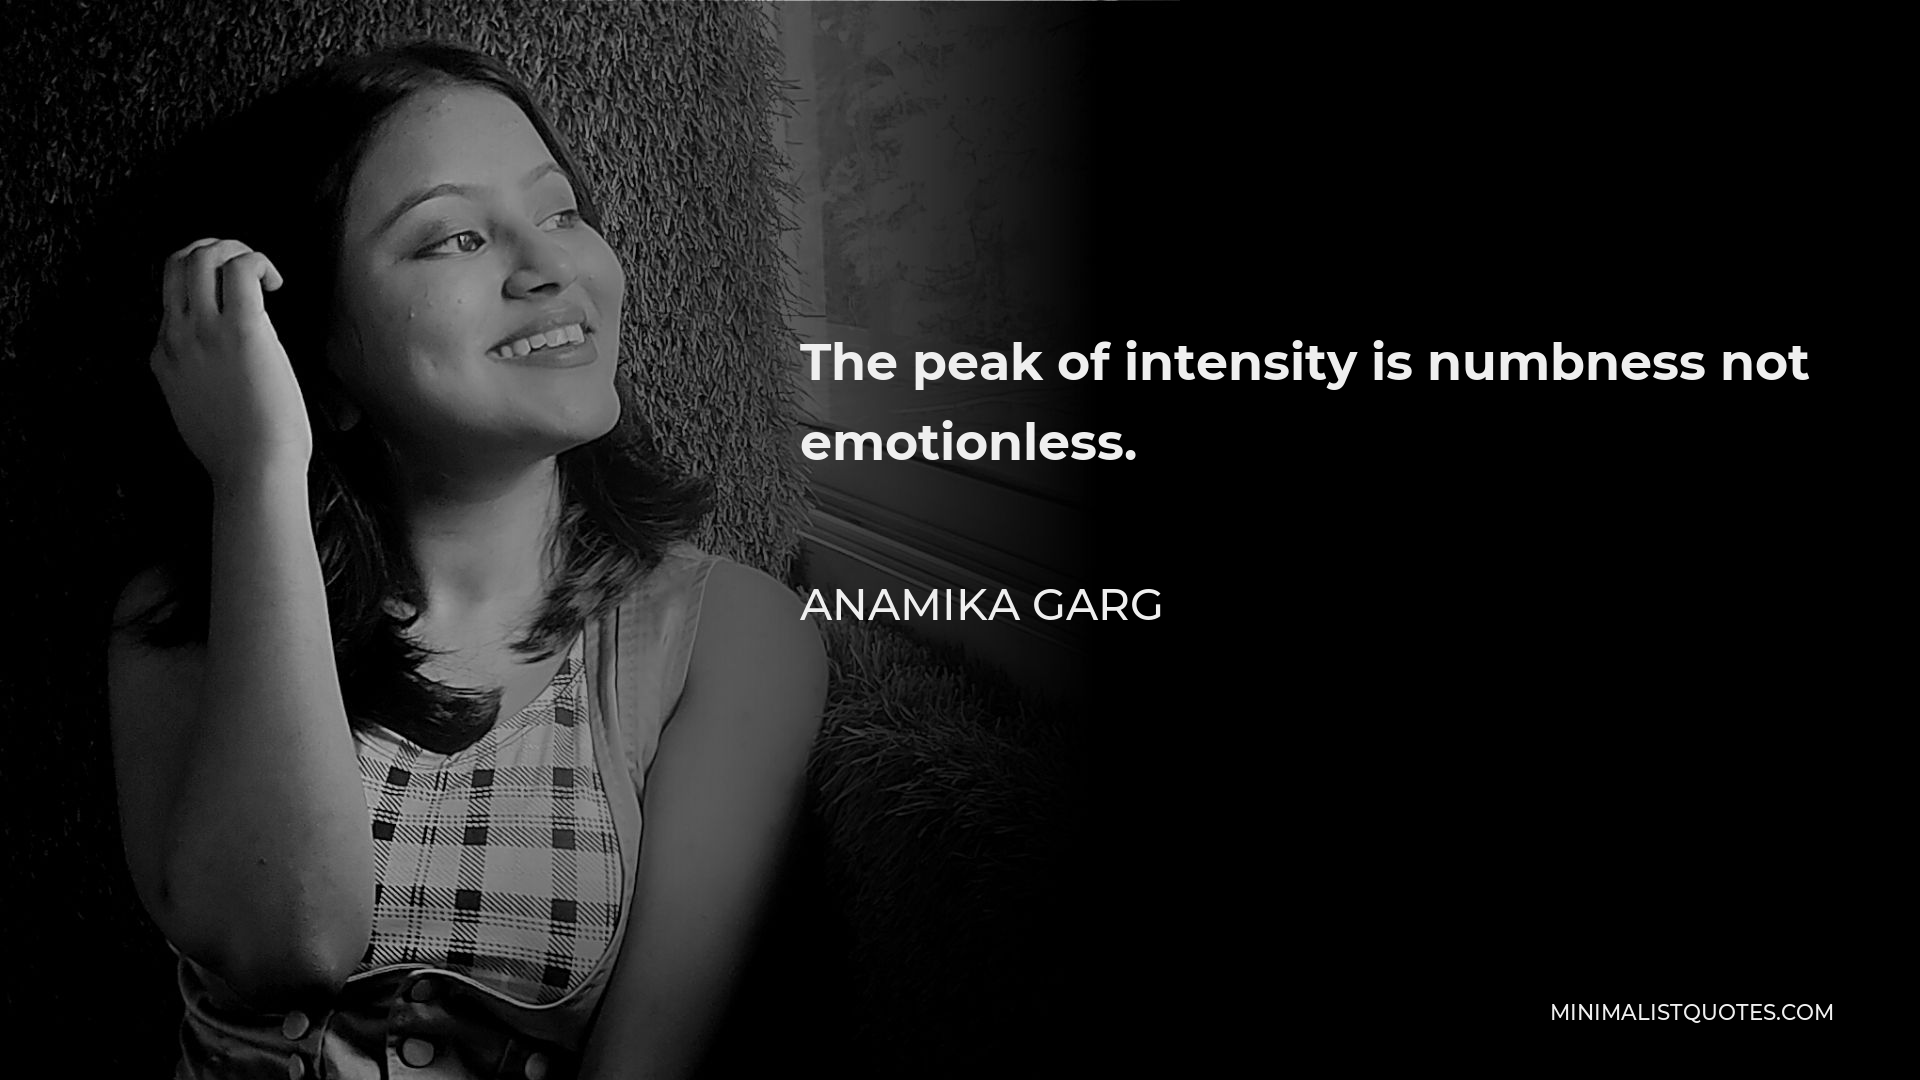 Anamika Garg Quote - The peak of intensity is numbness not emotionless.